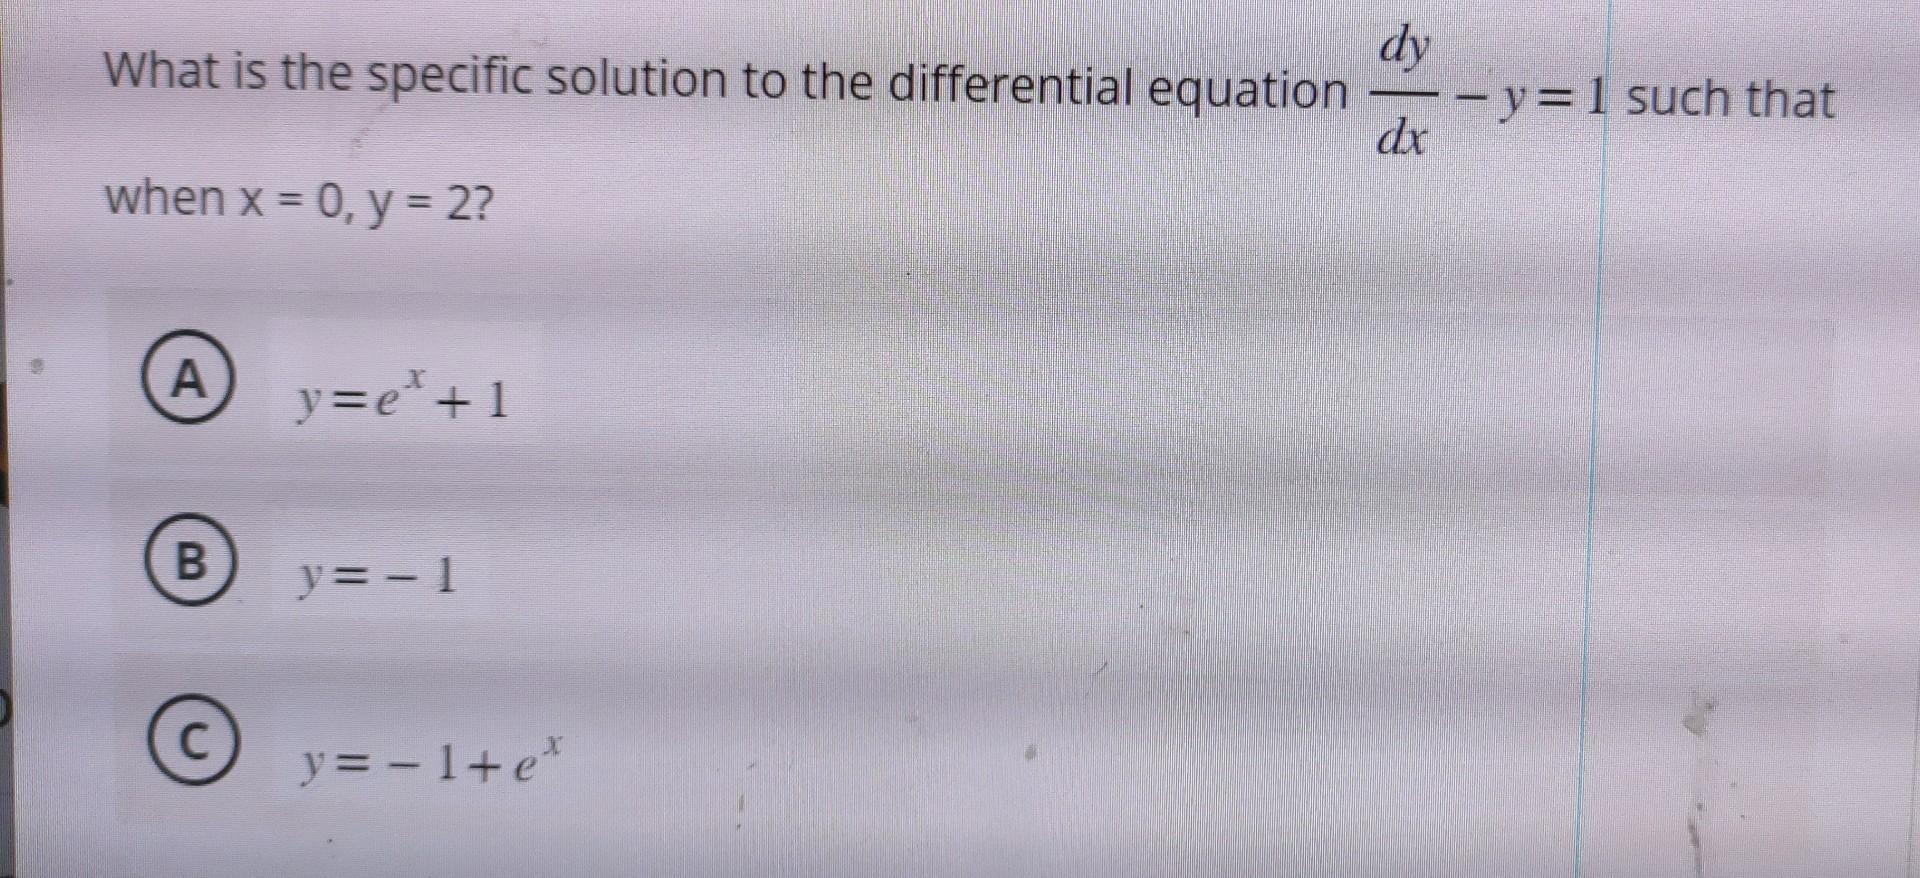 dy What is the specific solution to the differential equation-y-1 such that dx when x = 0, y = 2? A B C y=e*